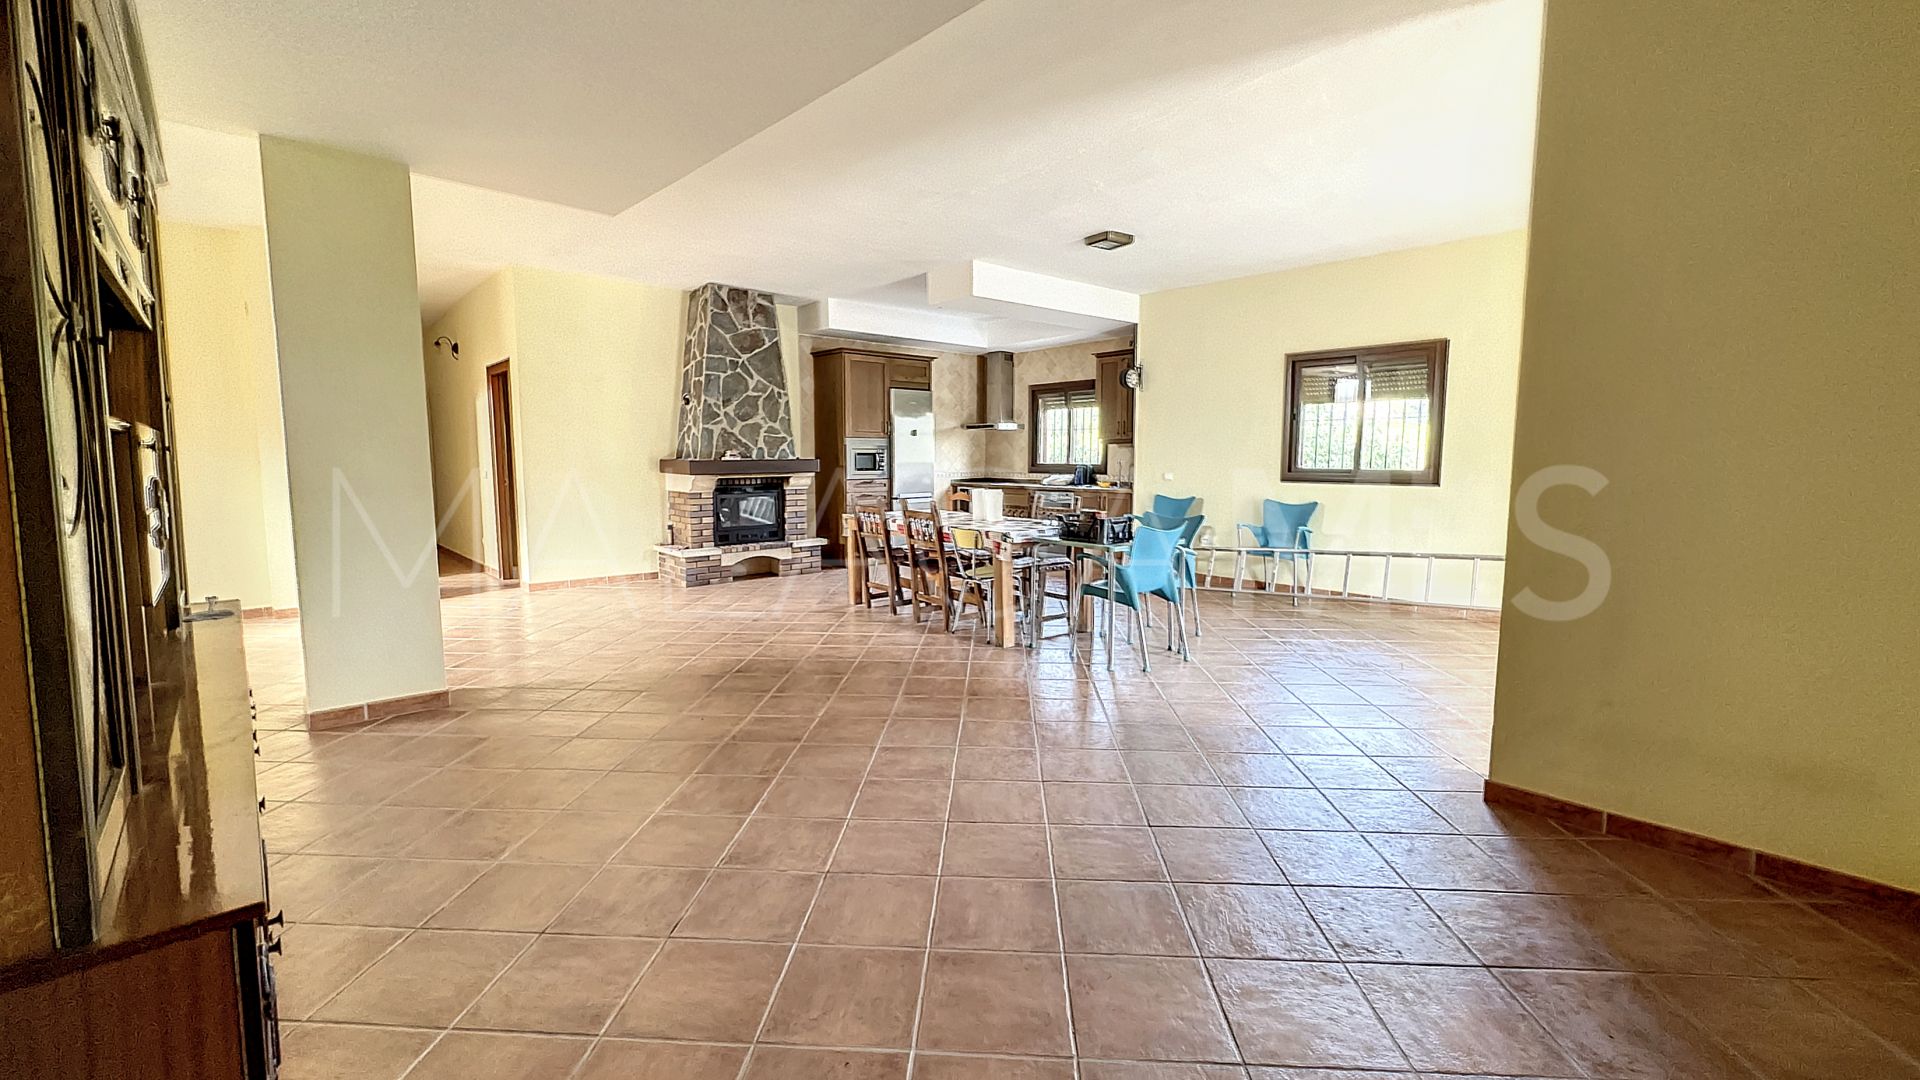 6 bedrooms country house in Reinoso for sale